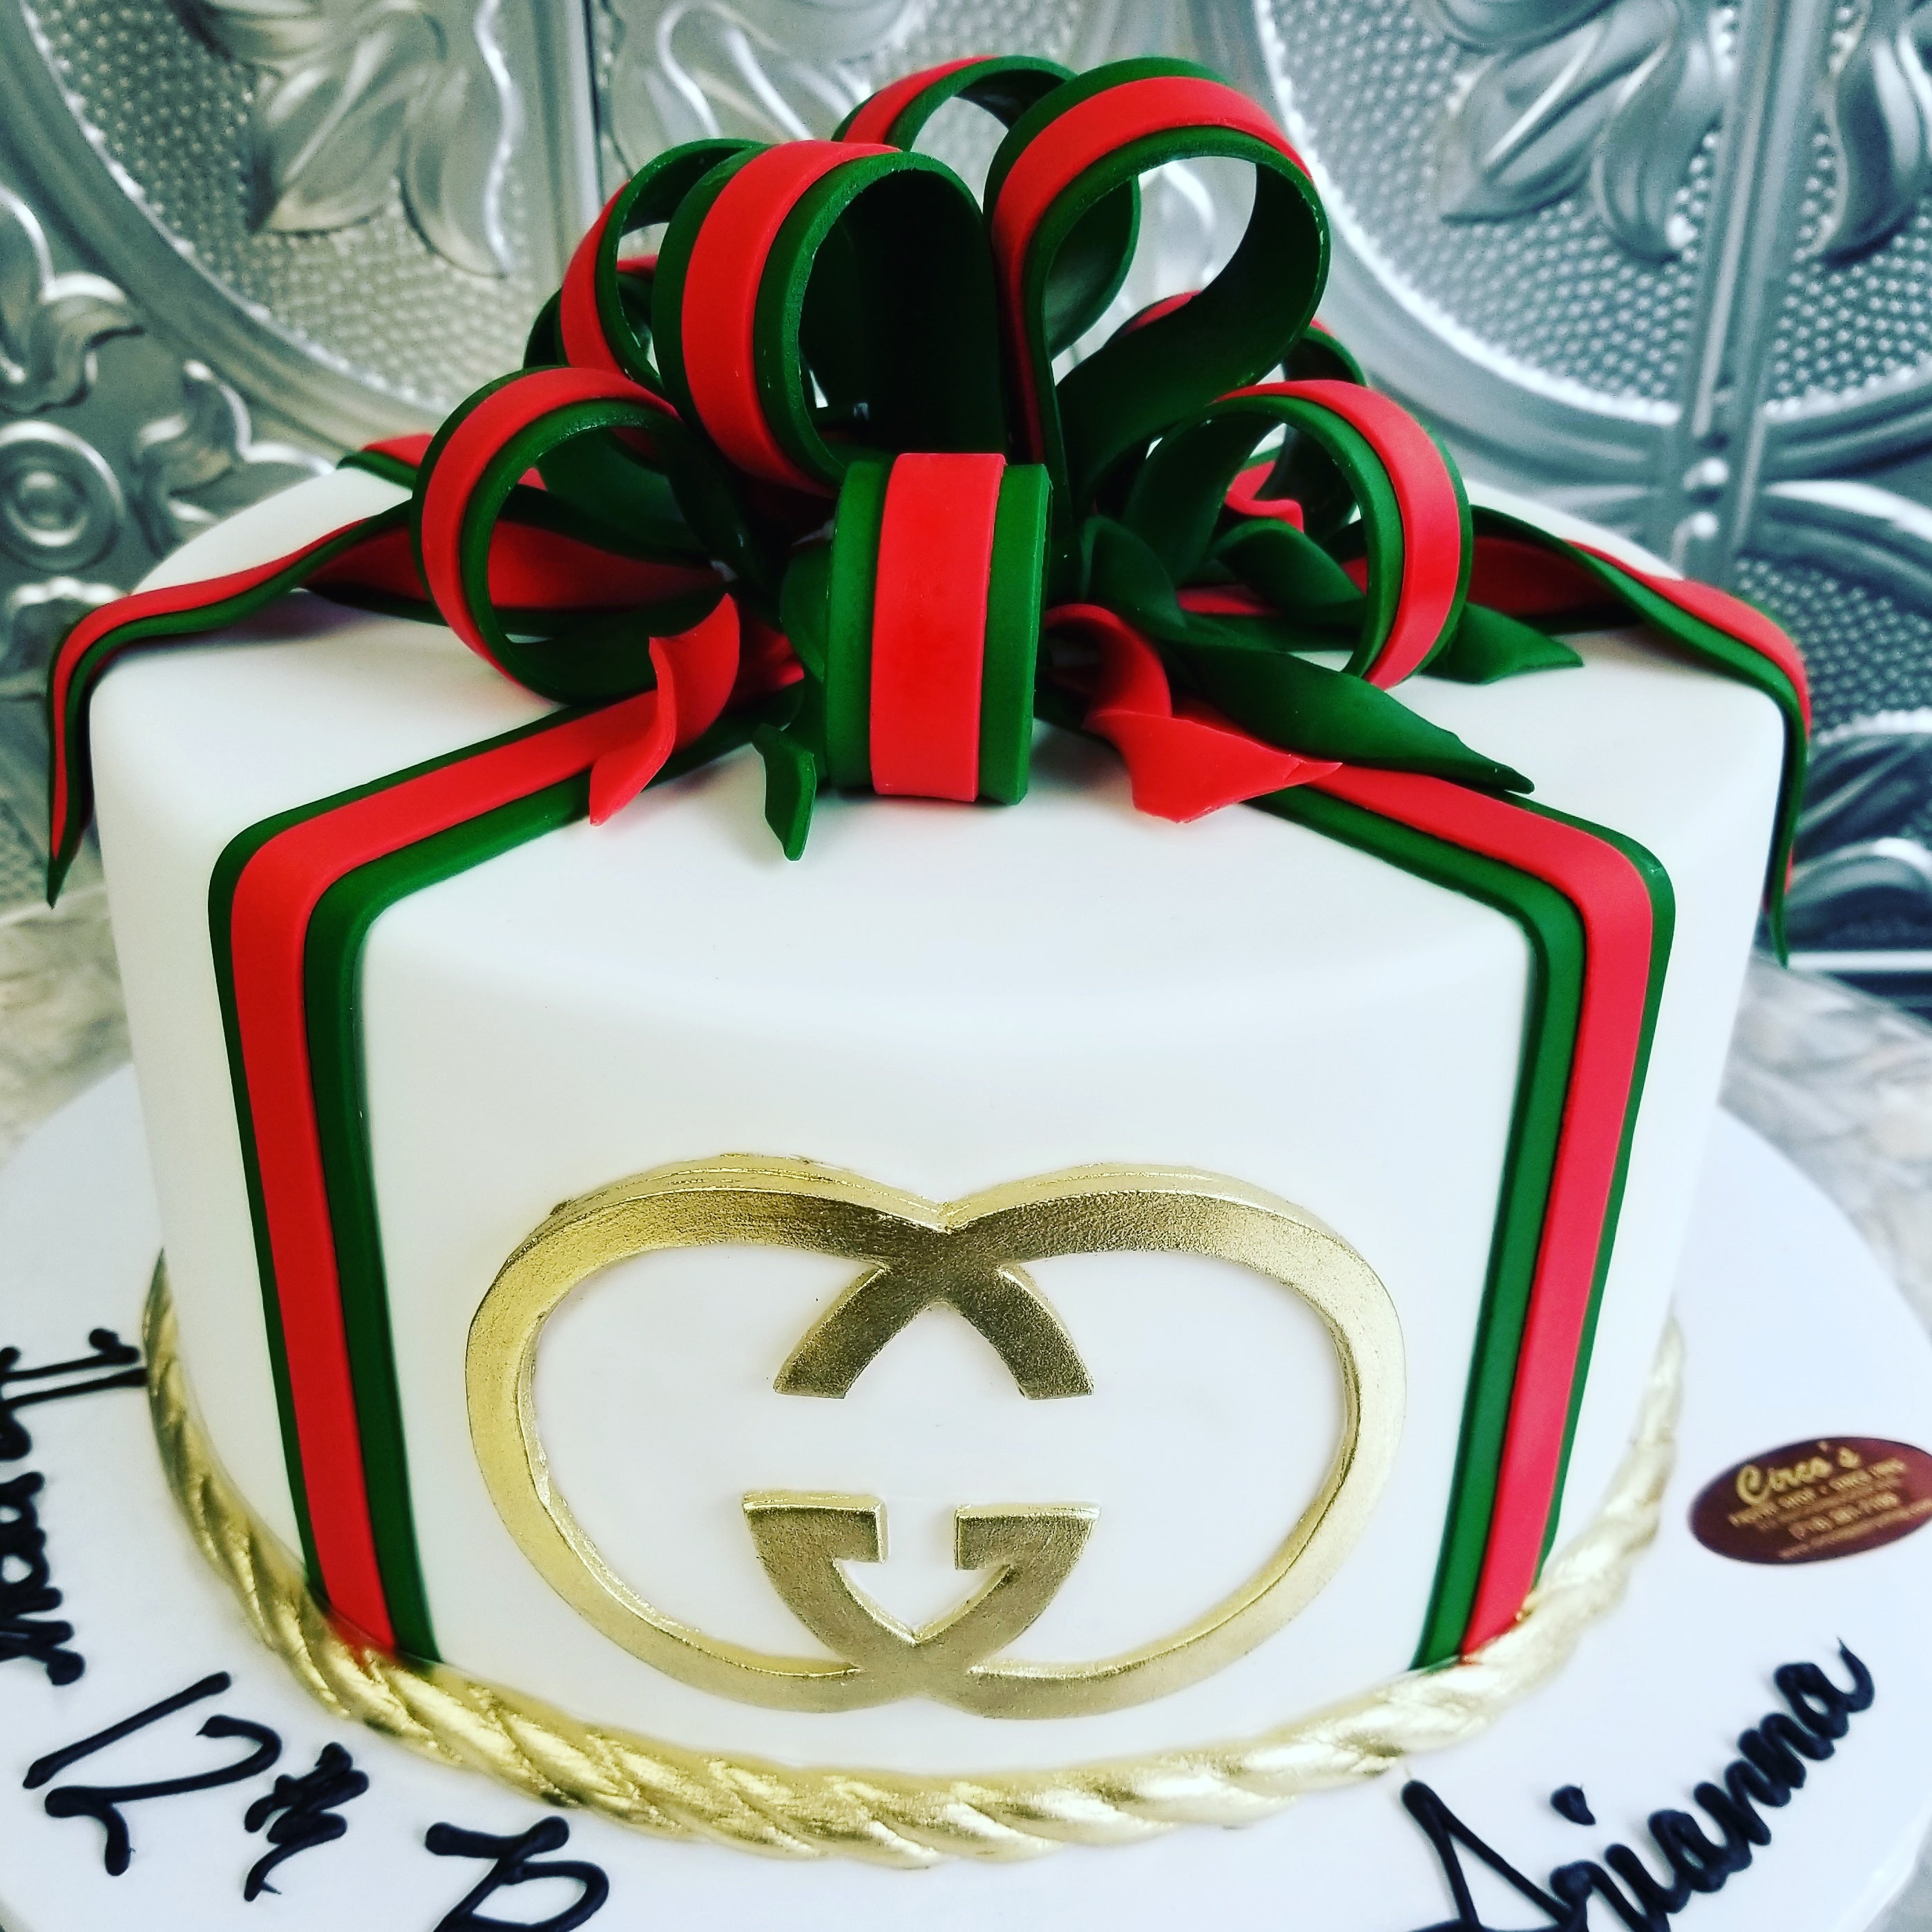 Hennessy Birthday Cake! - Sweet Retreat the Cake Boutique | Facebook